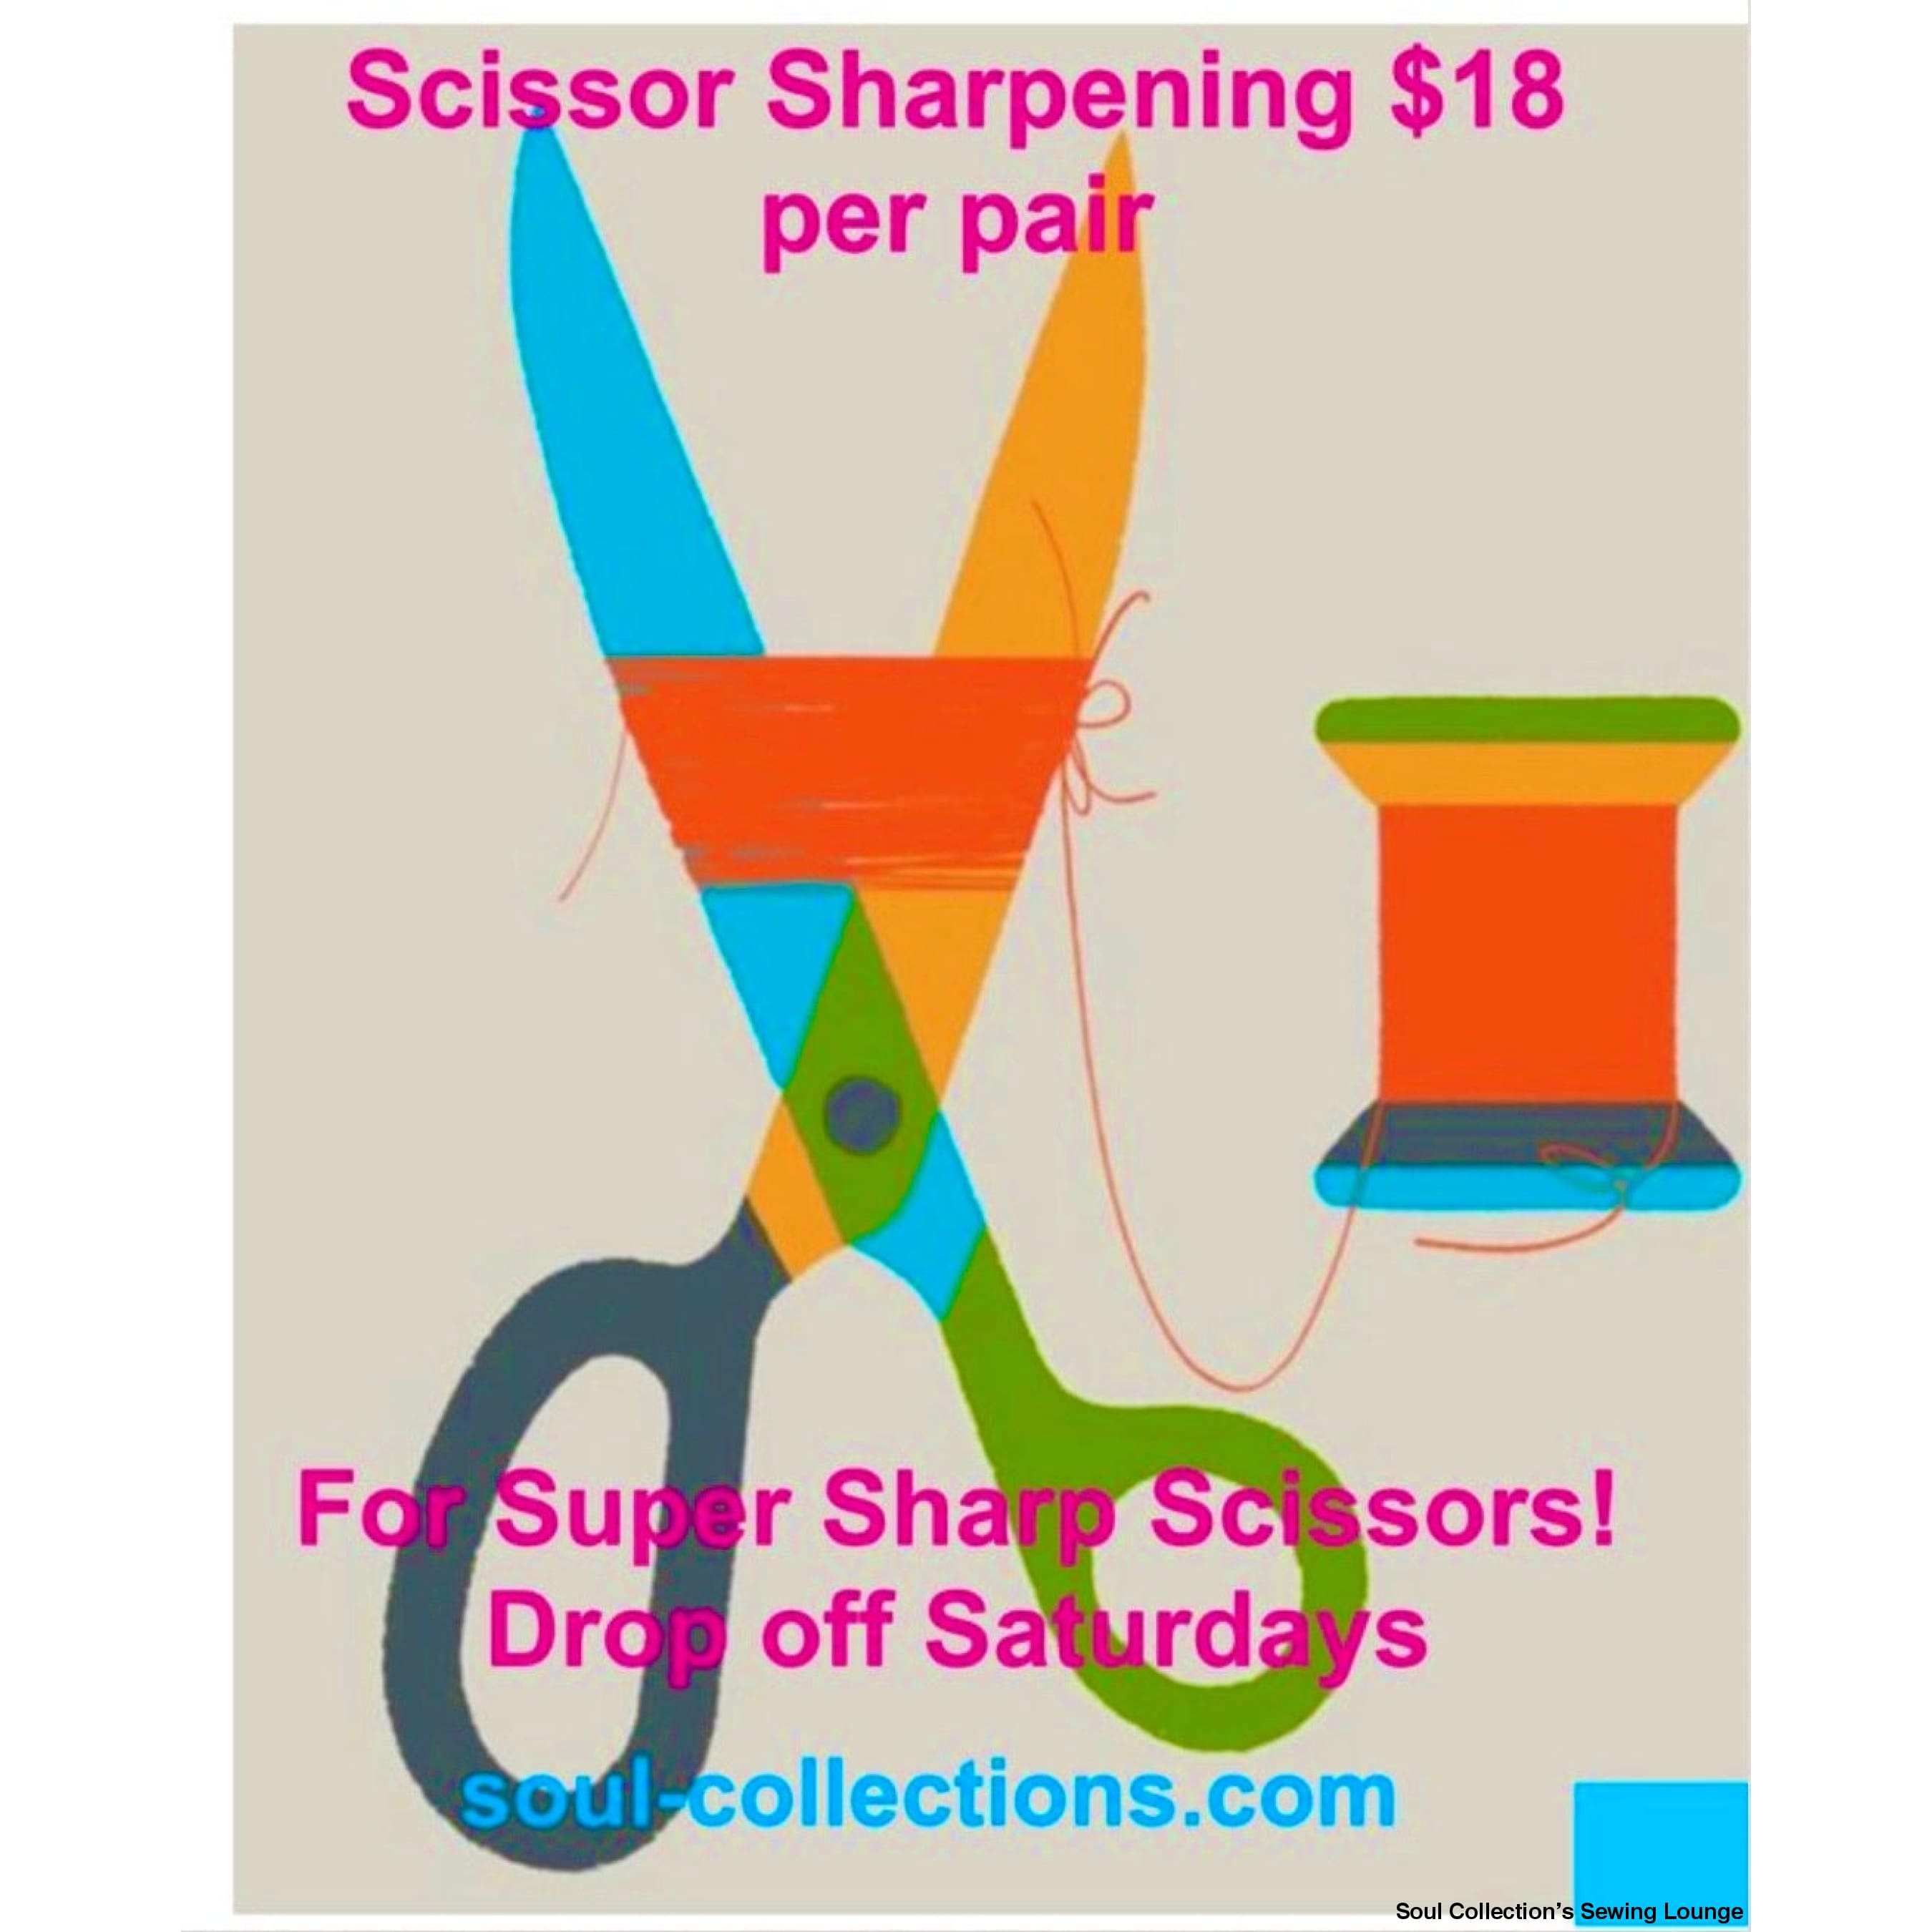 Soul Collection's Sewing Lounge - Scissor Sharpening